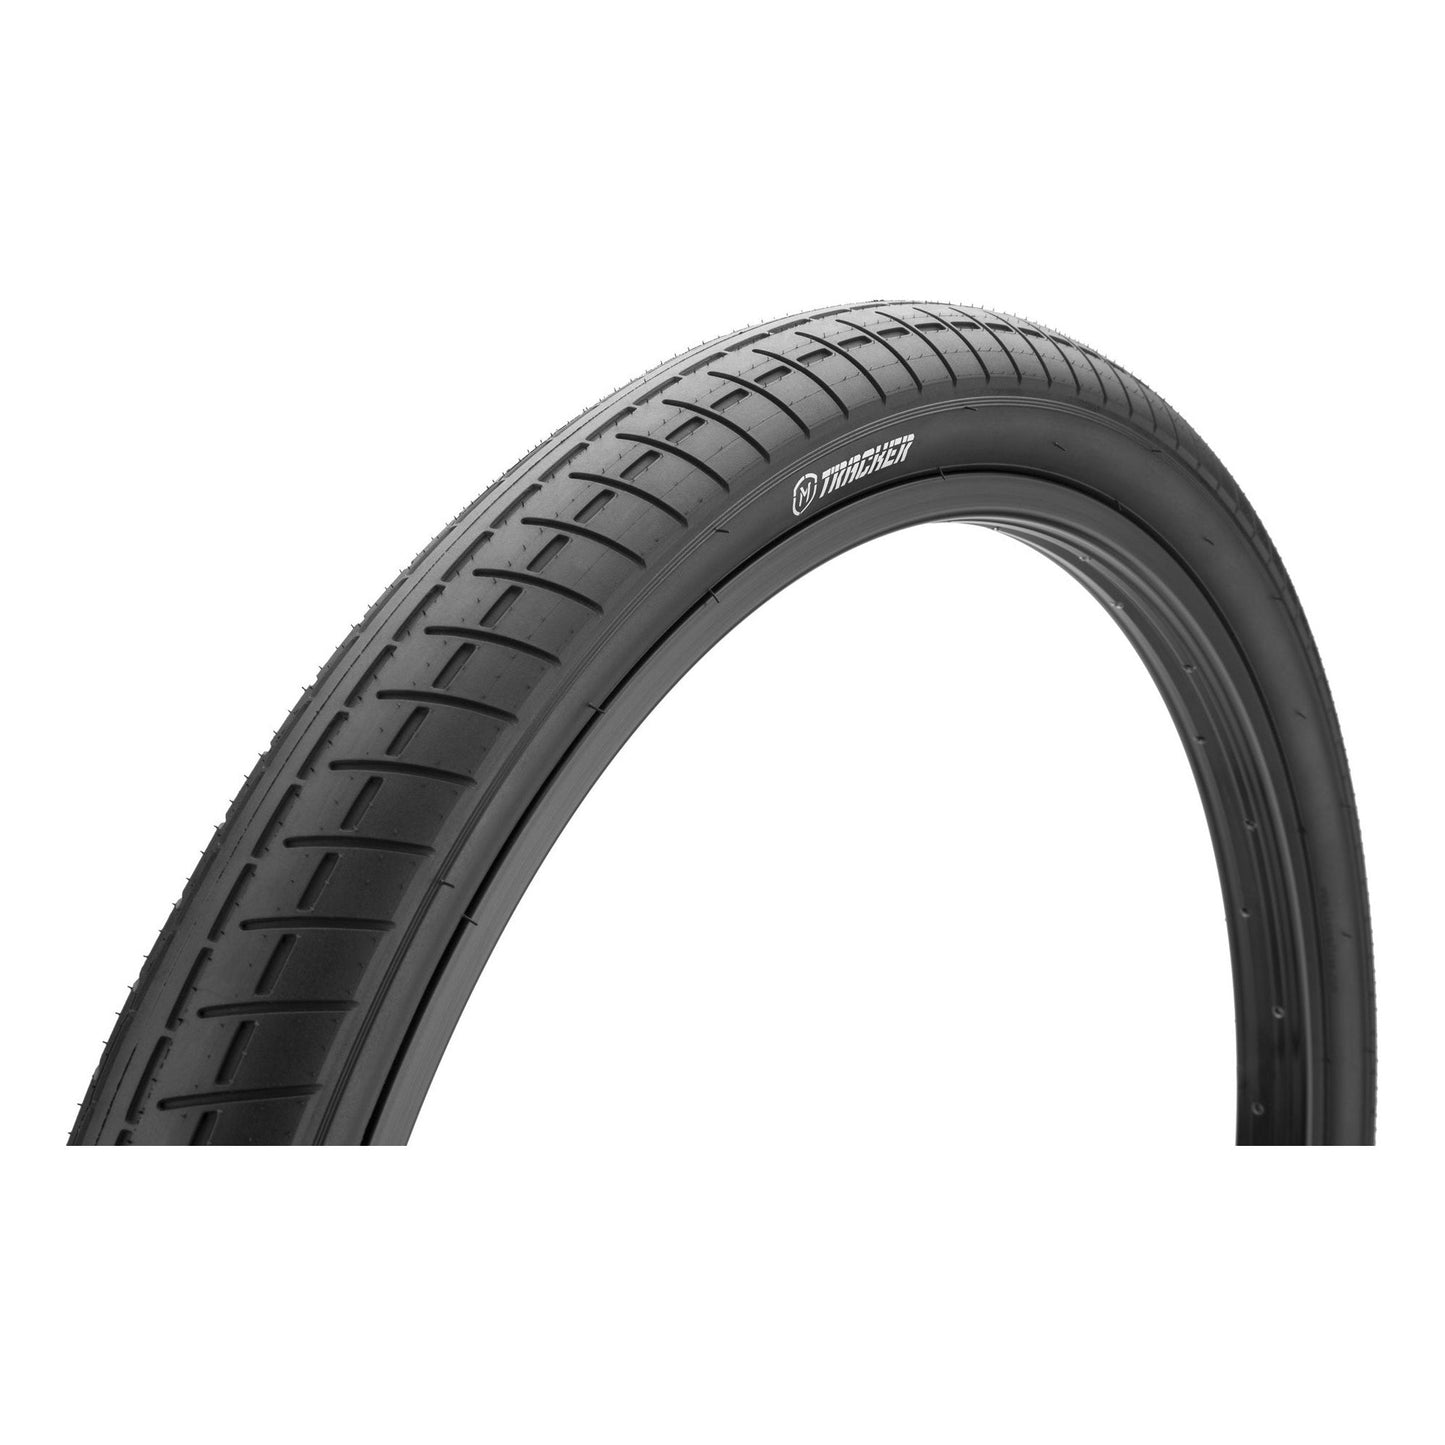 TIRE MISSION TRACKER 26 INCH